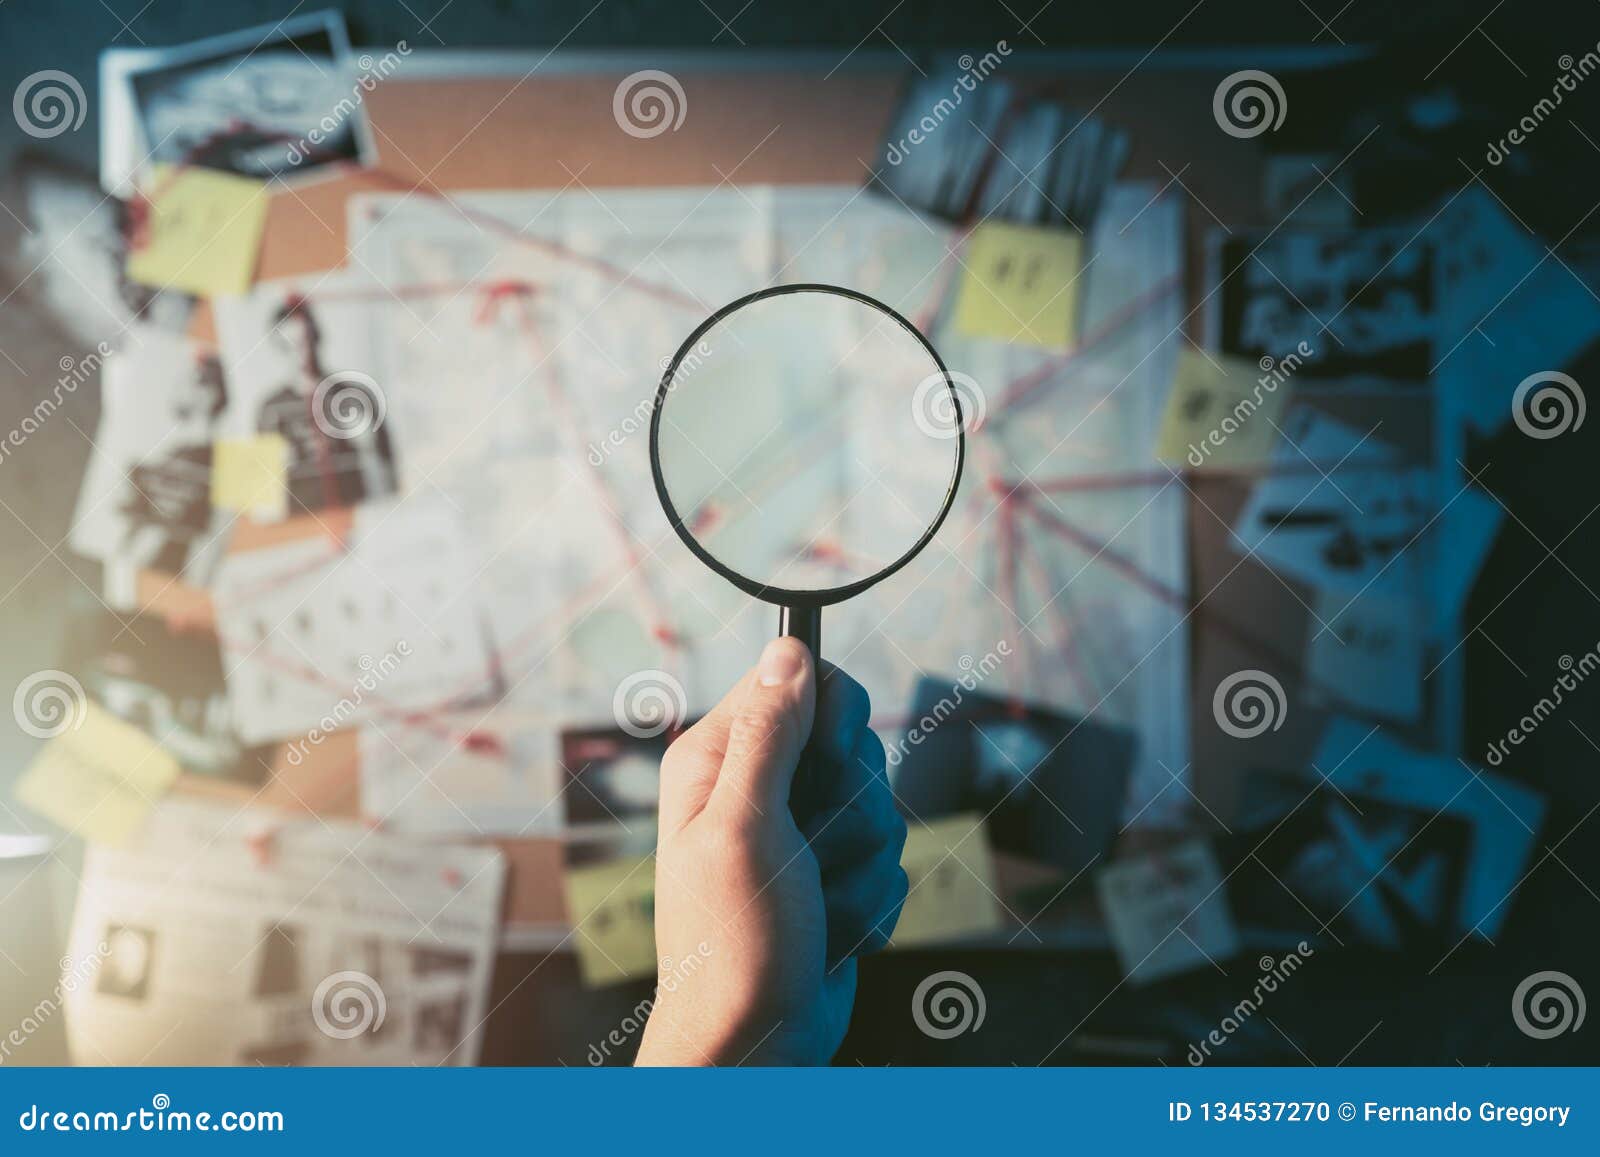 detective board filled with evidence